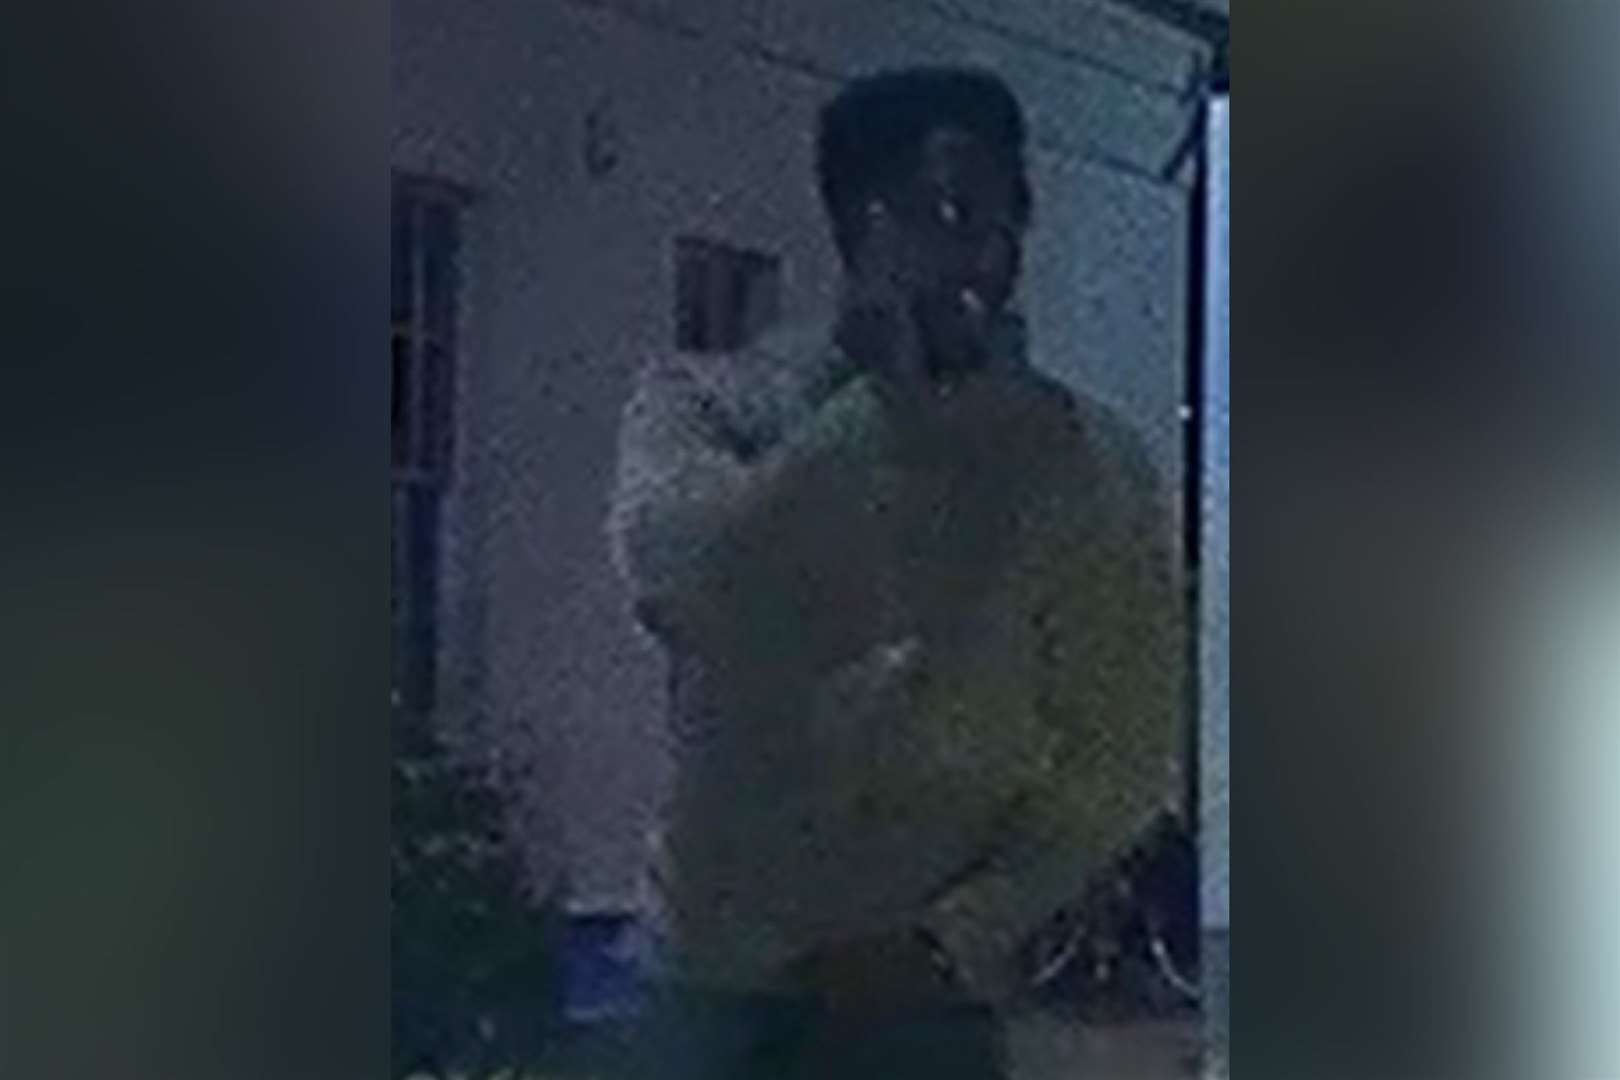 An image of a man has been released following an attack outside Canterbury West railway station. Picture: British Transport Police